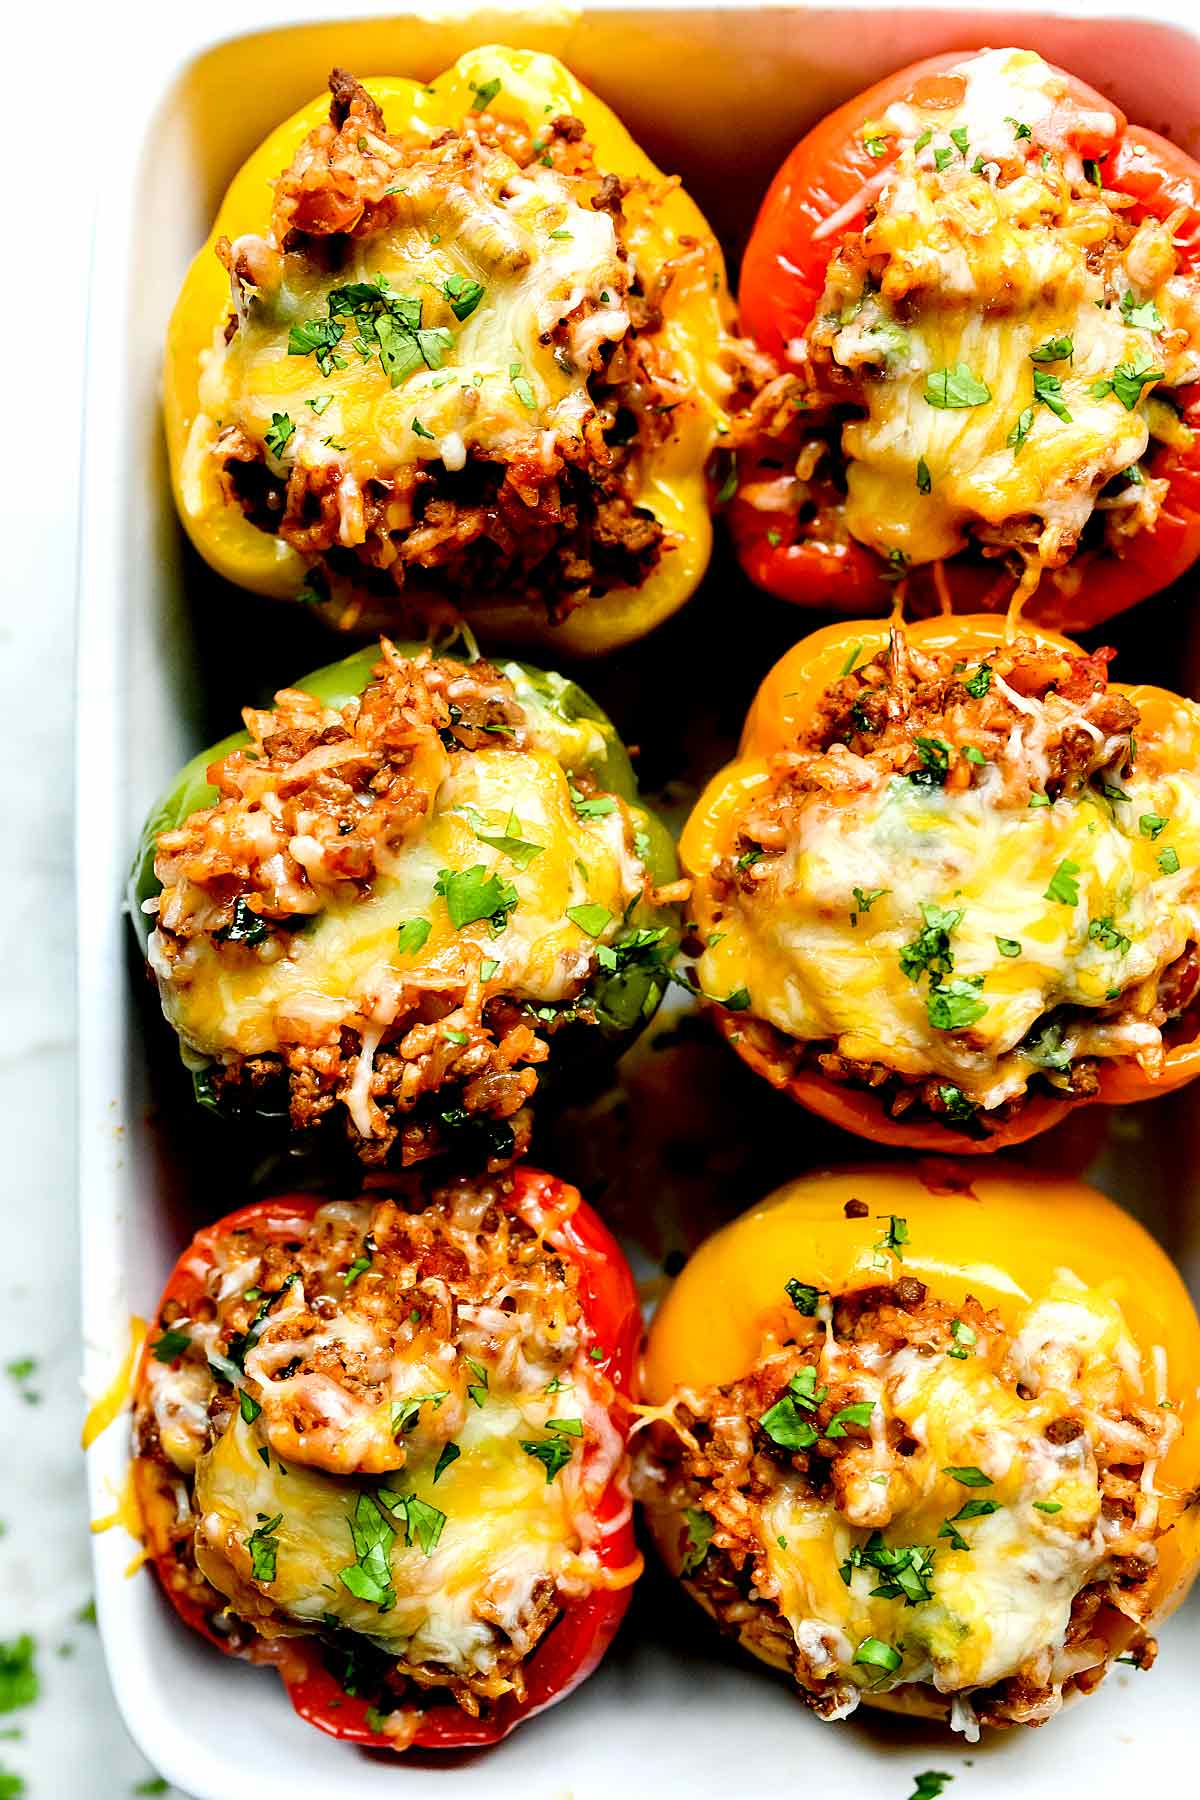 The Best Mexican Stuffed Peppers Foodiecrush Com,How Wide Is A Queen Size Bed